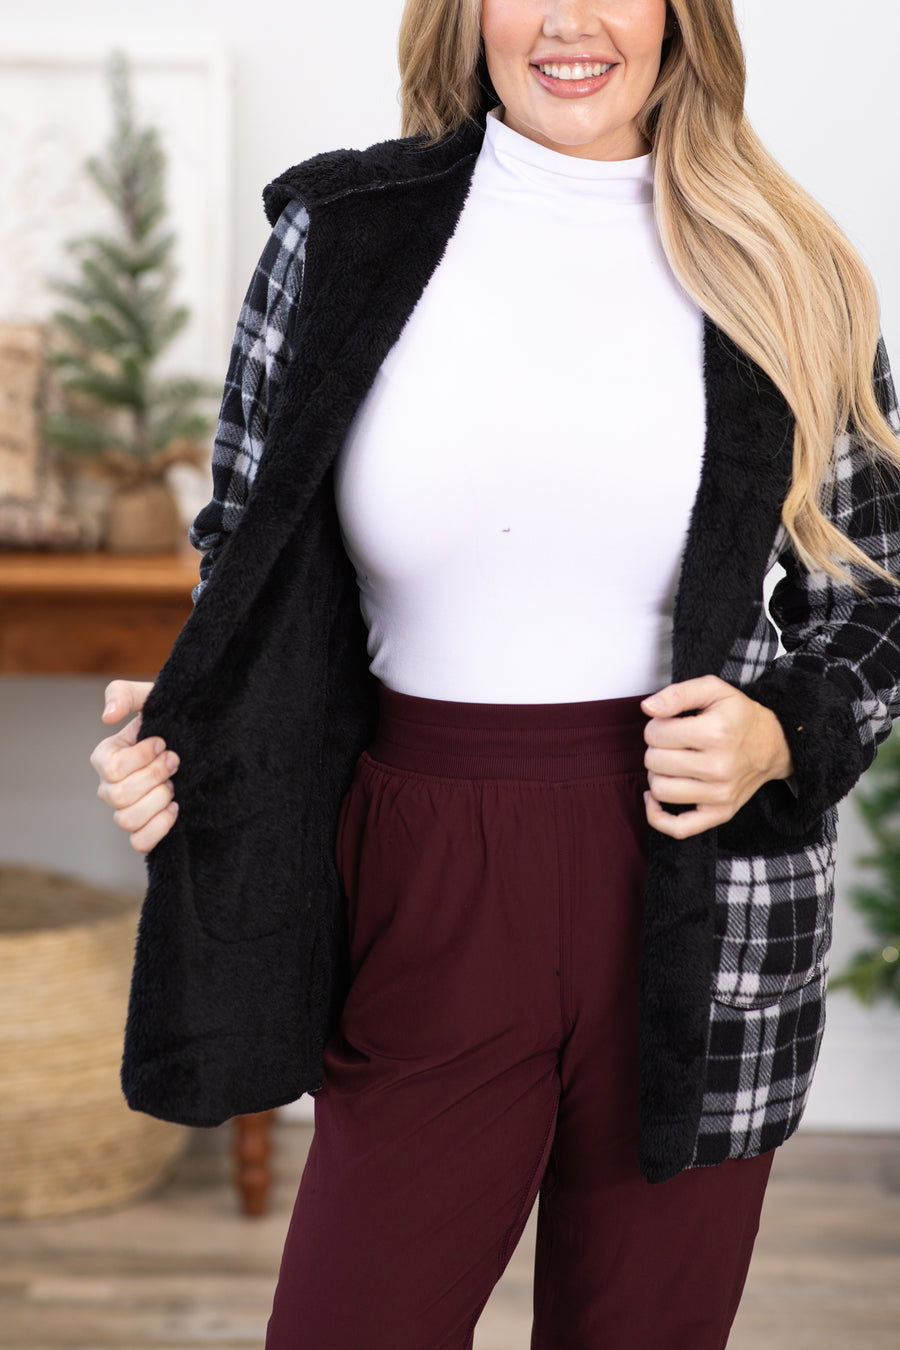 Black and Grey Plaid Faux Fur Lined Jacket